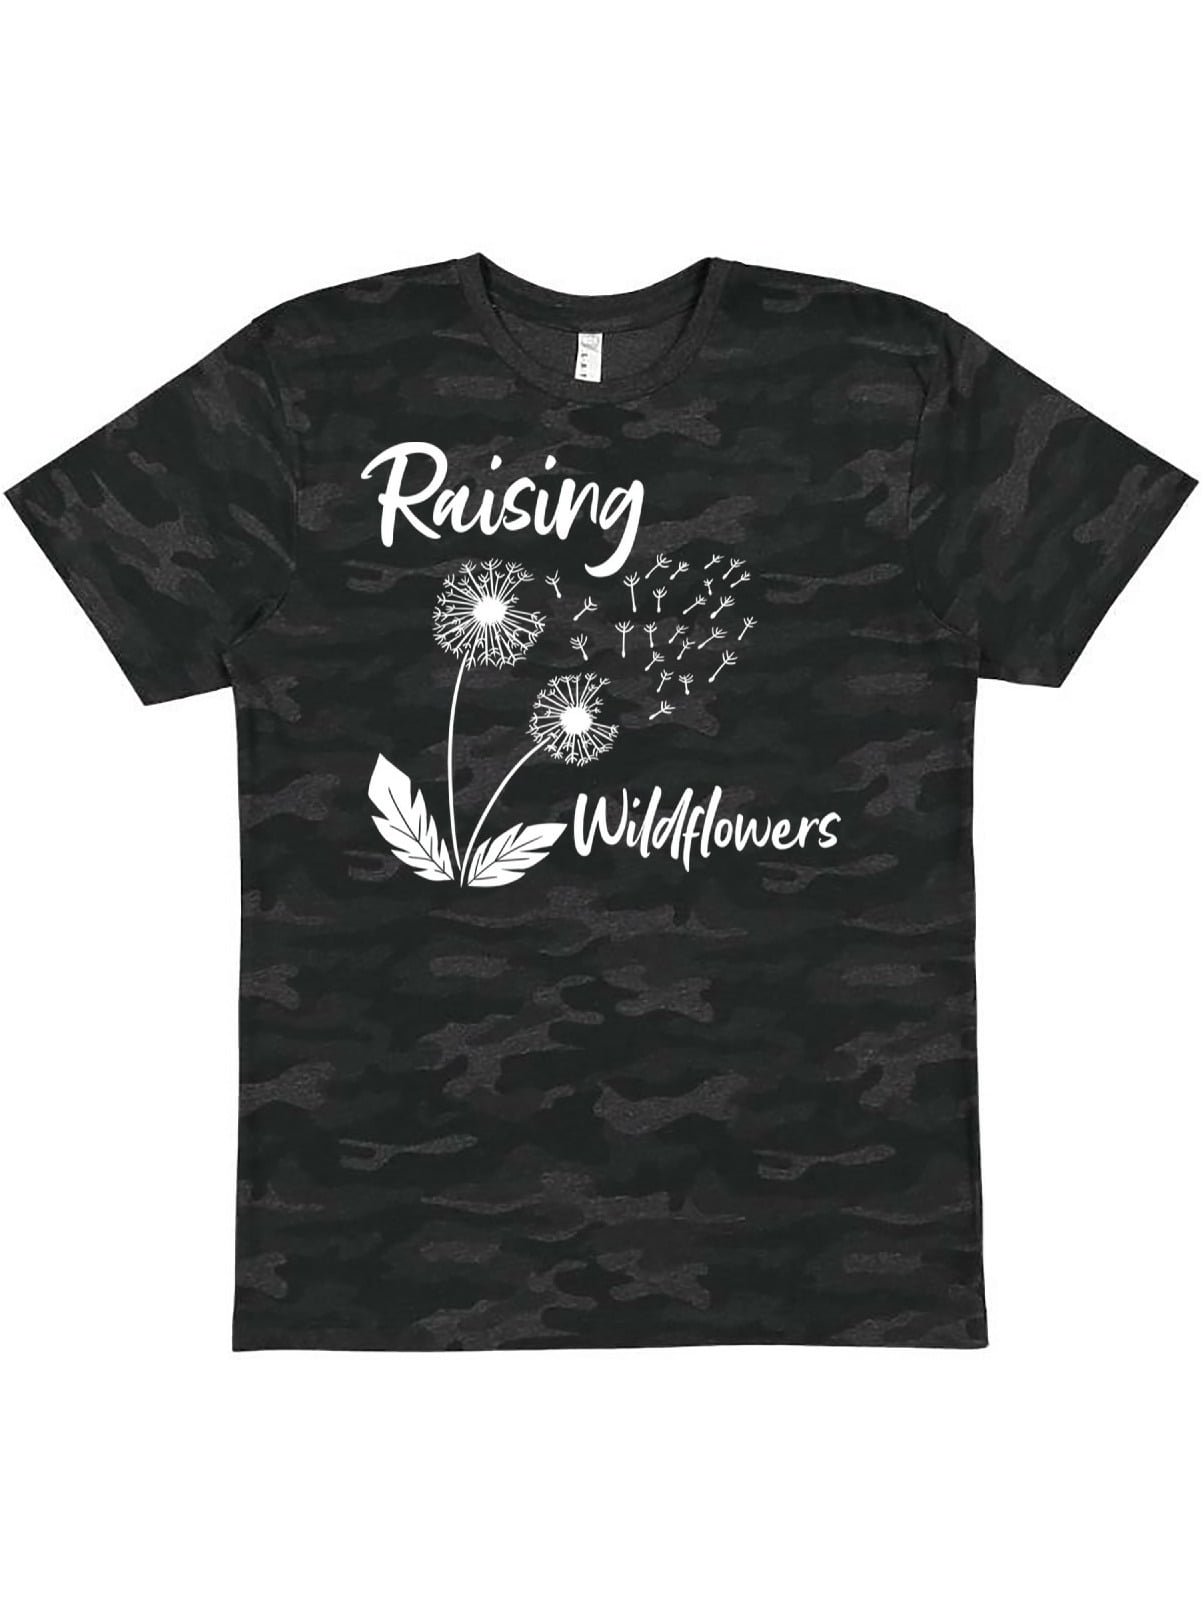 Women/'s Tank Top Raising Wildflowers Tank Plant Tank Nature Shirt Raising Wildflowers Plant Mom Tank Gift for Her Plant Lover Gift